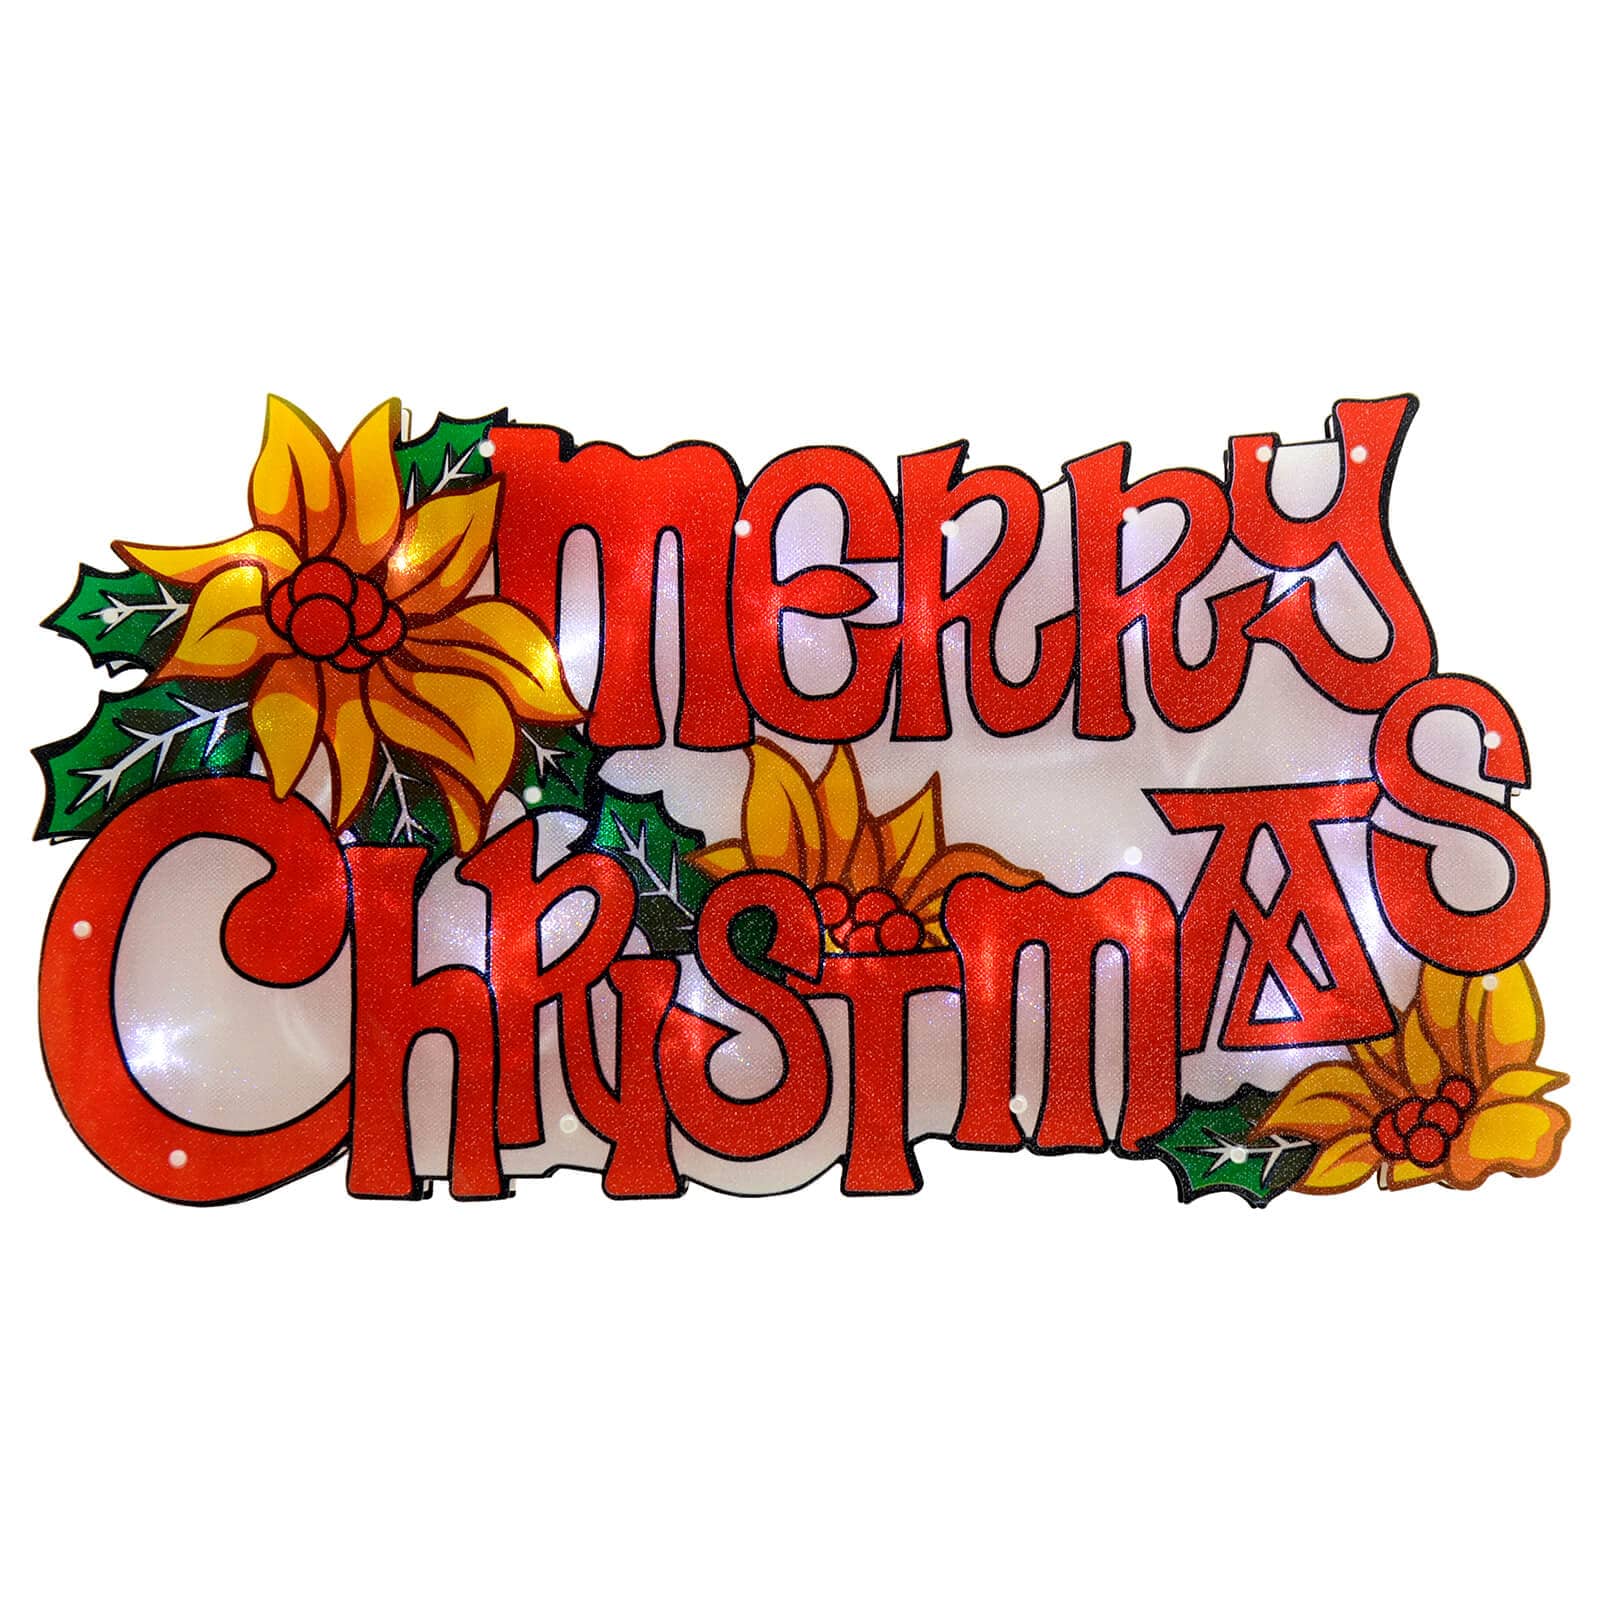 Light up Merry Christmas window silhouette hanging decoration with red letters and festive flowers